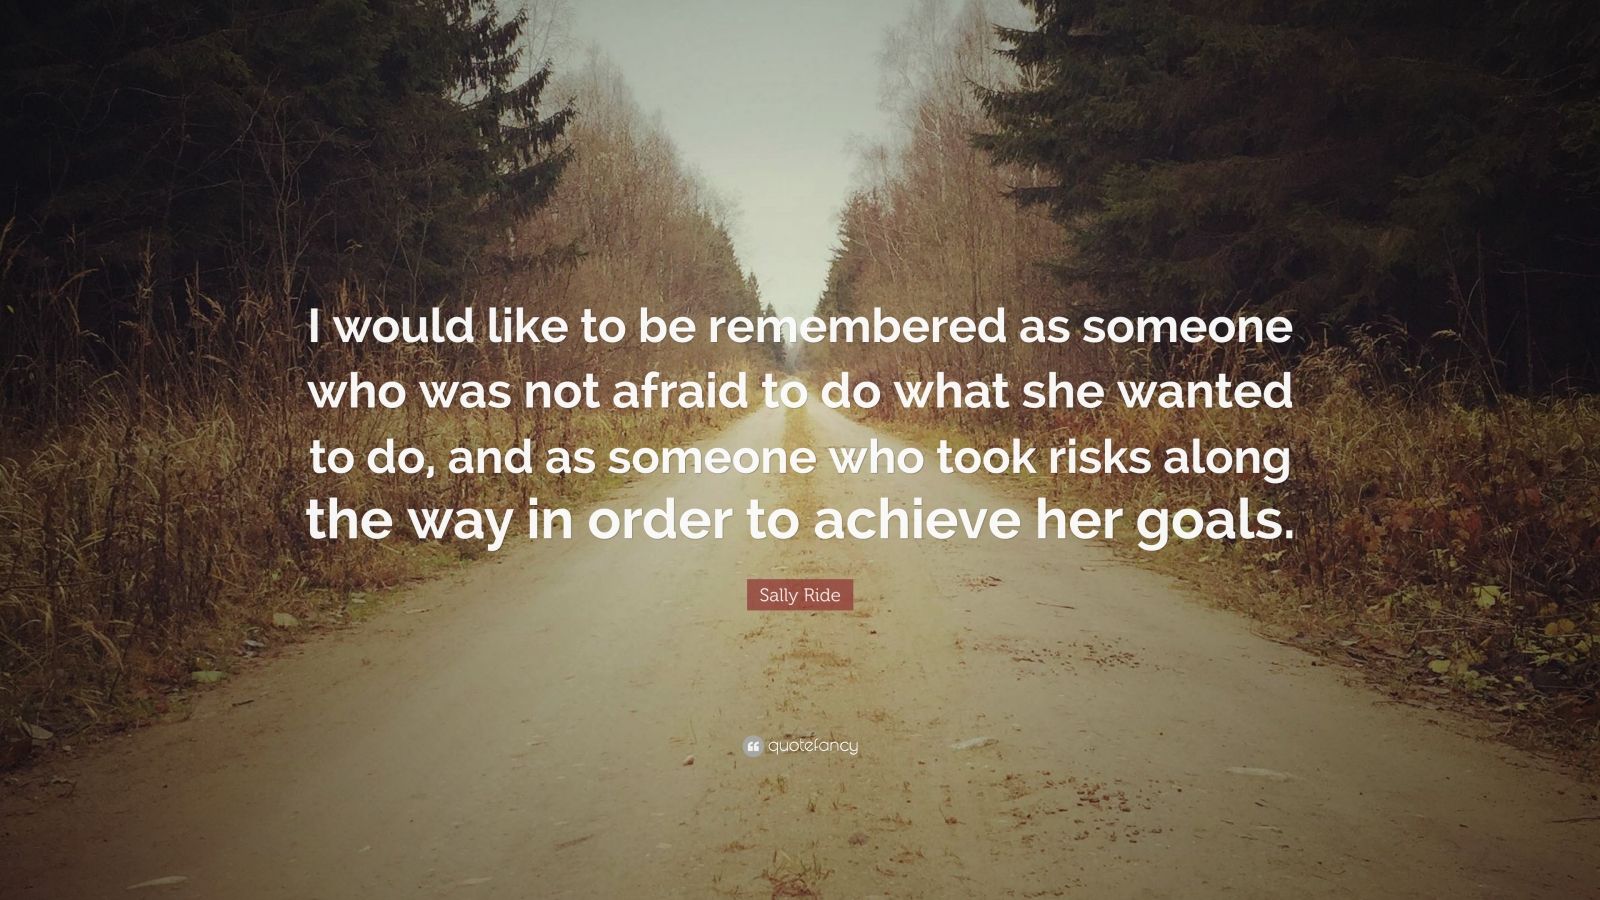 Sally Ride Quote: “I would like to be remembered as someone who was not ...